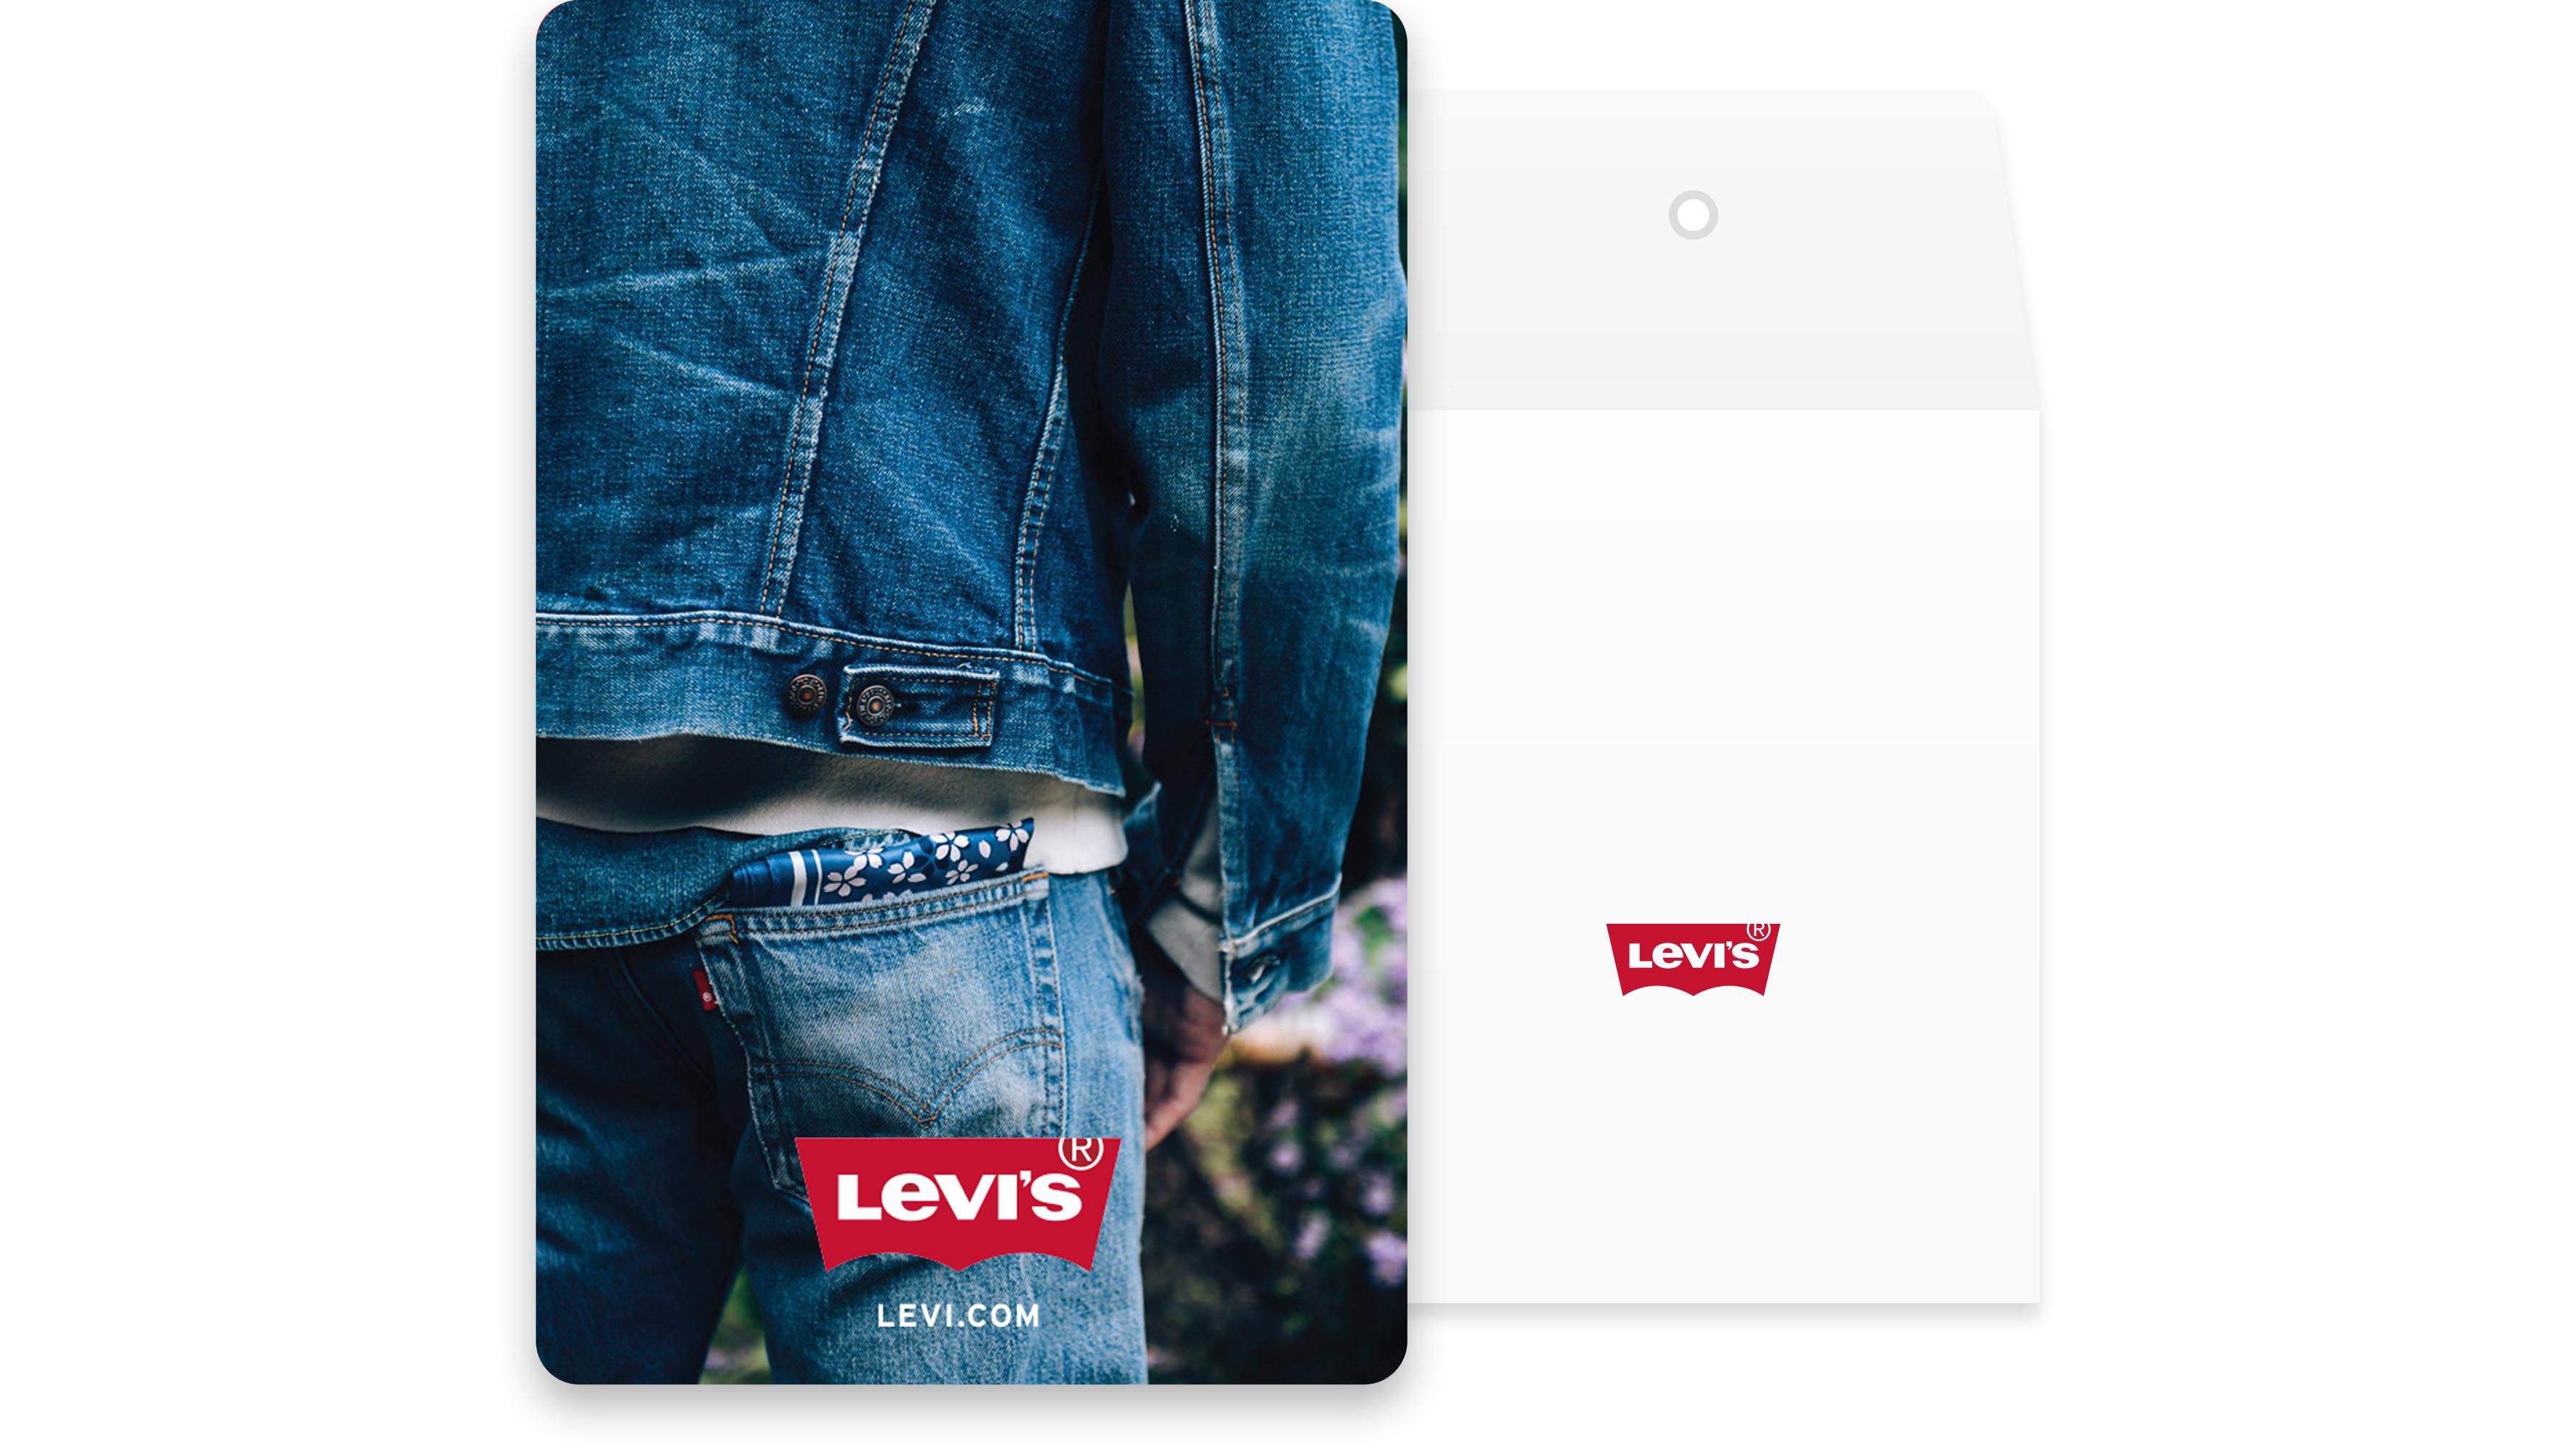 cheapest place to buy levis